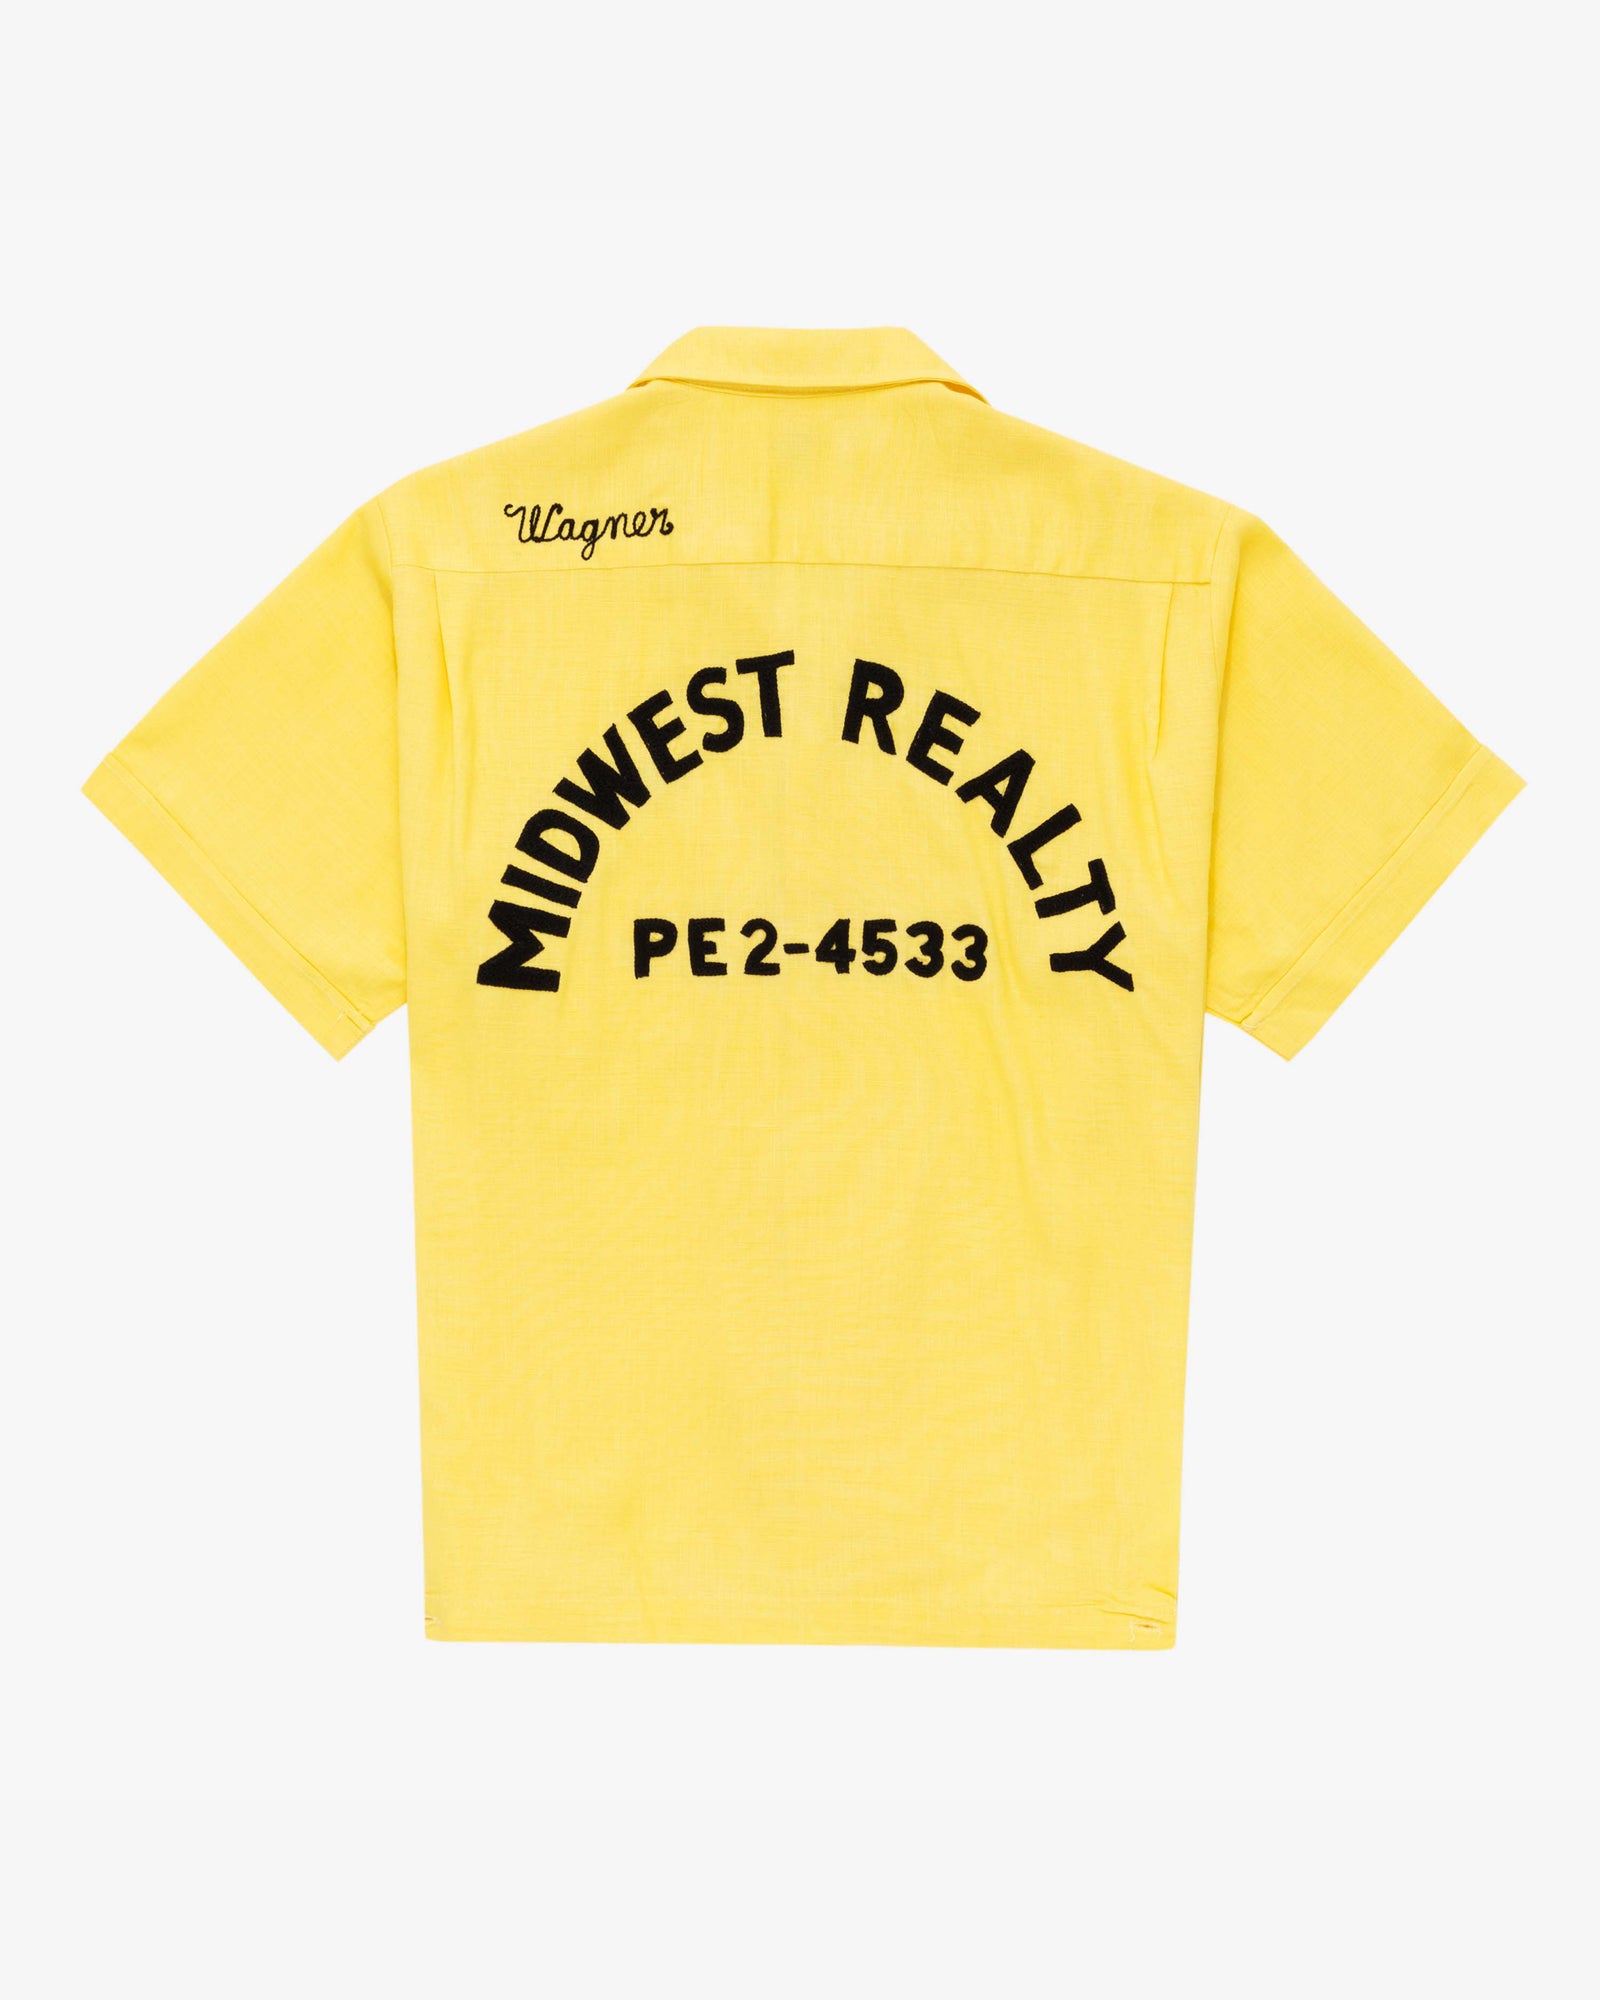 Vintage Midwest Realty Chainstitch Shirt